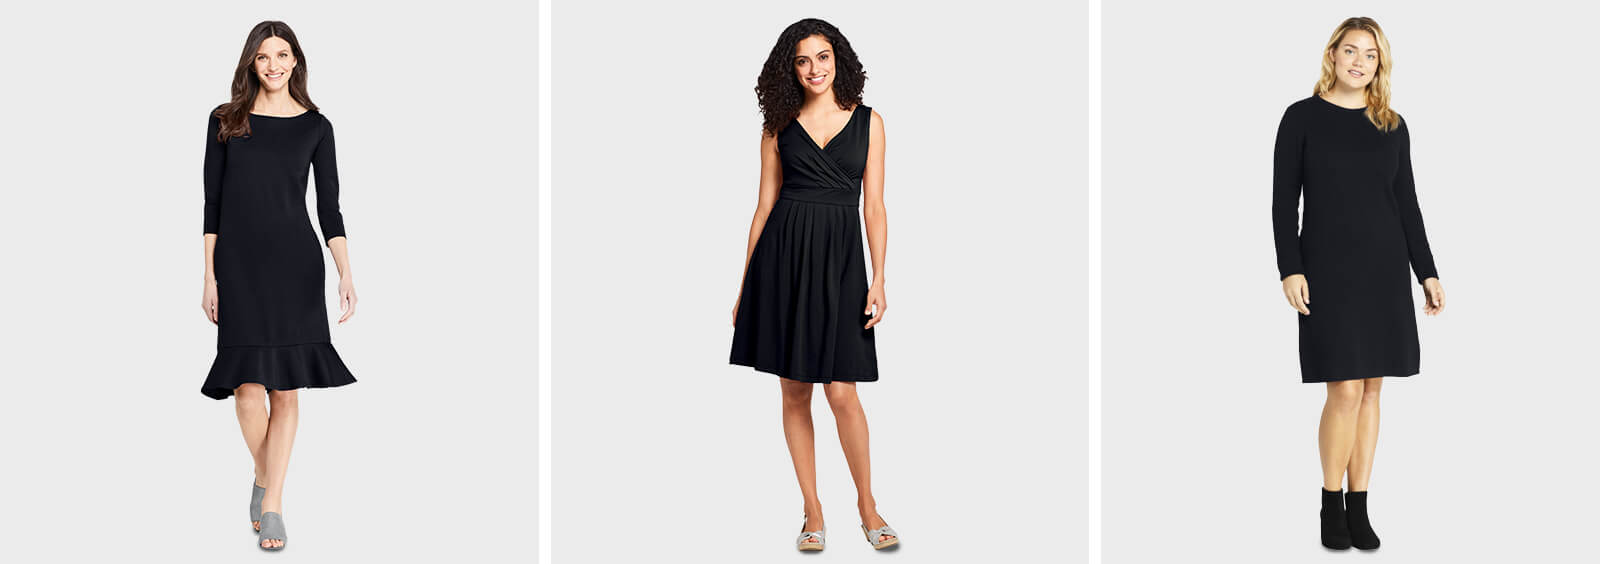 Little Black Dress: Which One Is Best for You?